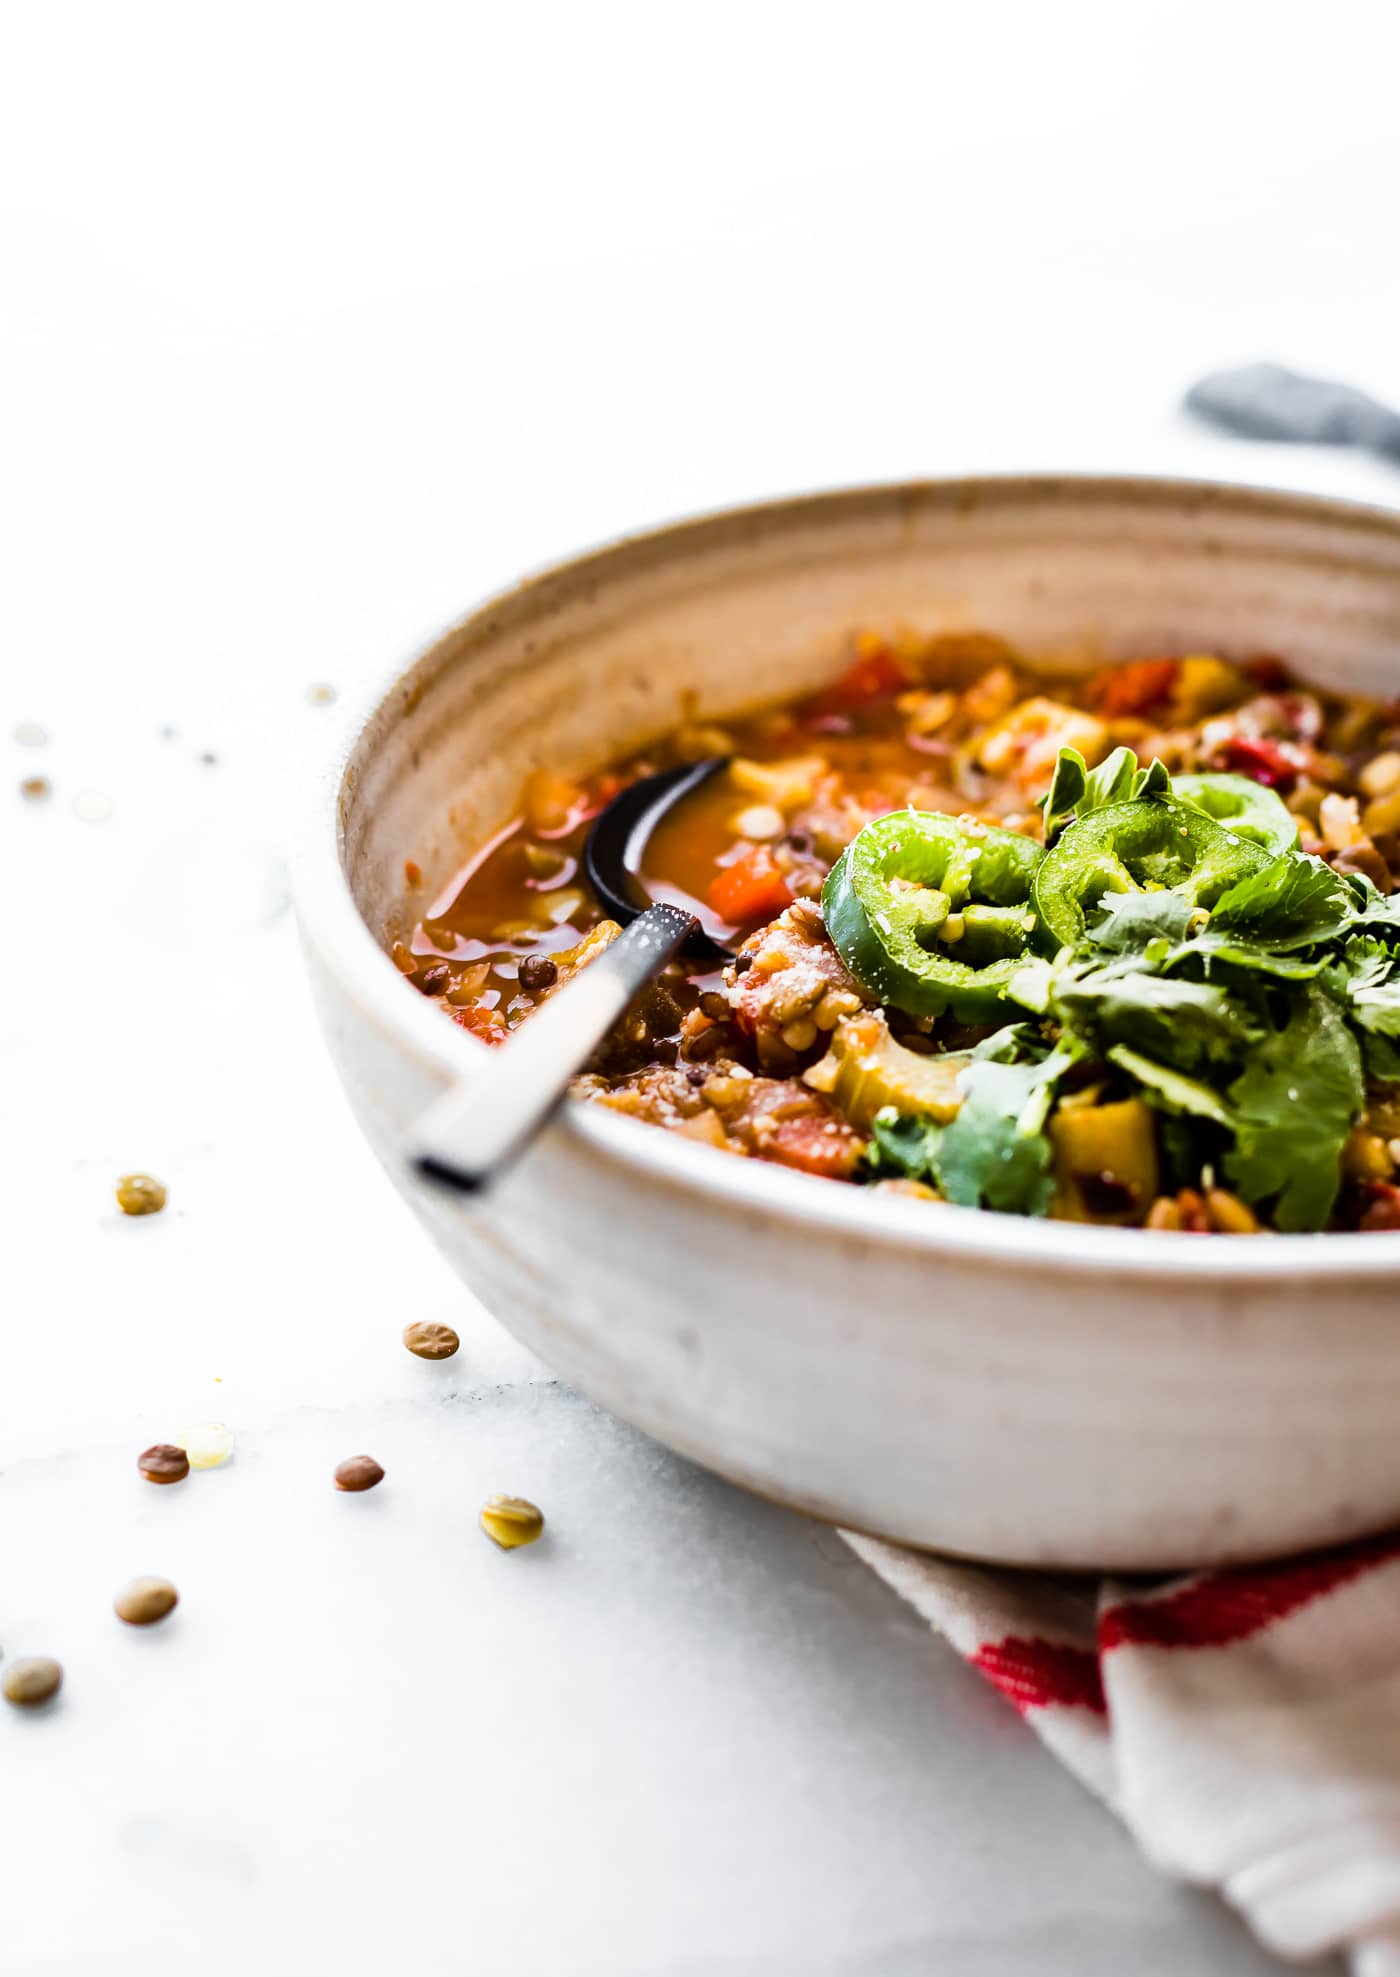 This vegan lentil gumbo recipe made quick and easy in the instant pot! A wholesome flavorful dinner that feeds a crowd. Rich in plant based protein, with the addition lentils, this gumbo is both filling and nourishing!